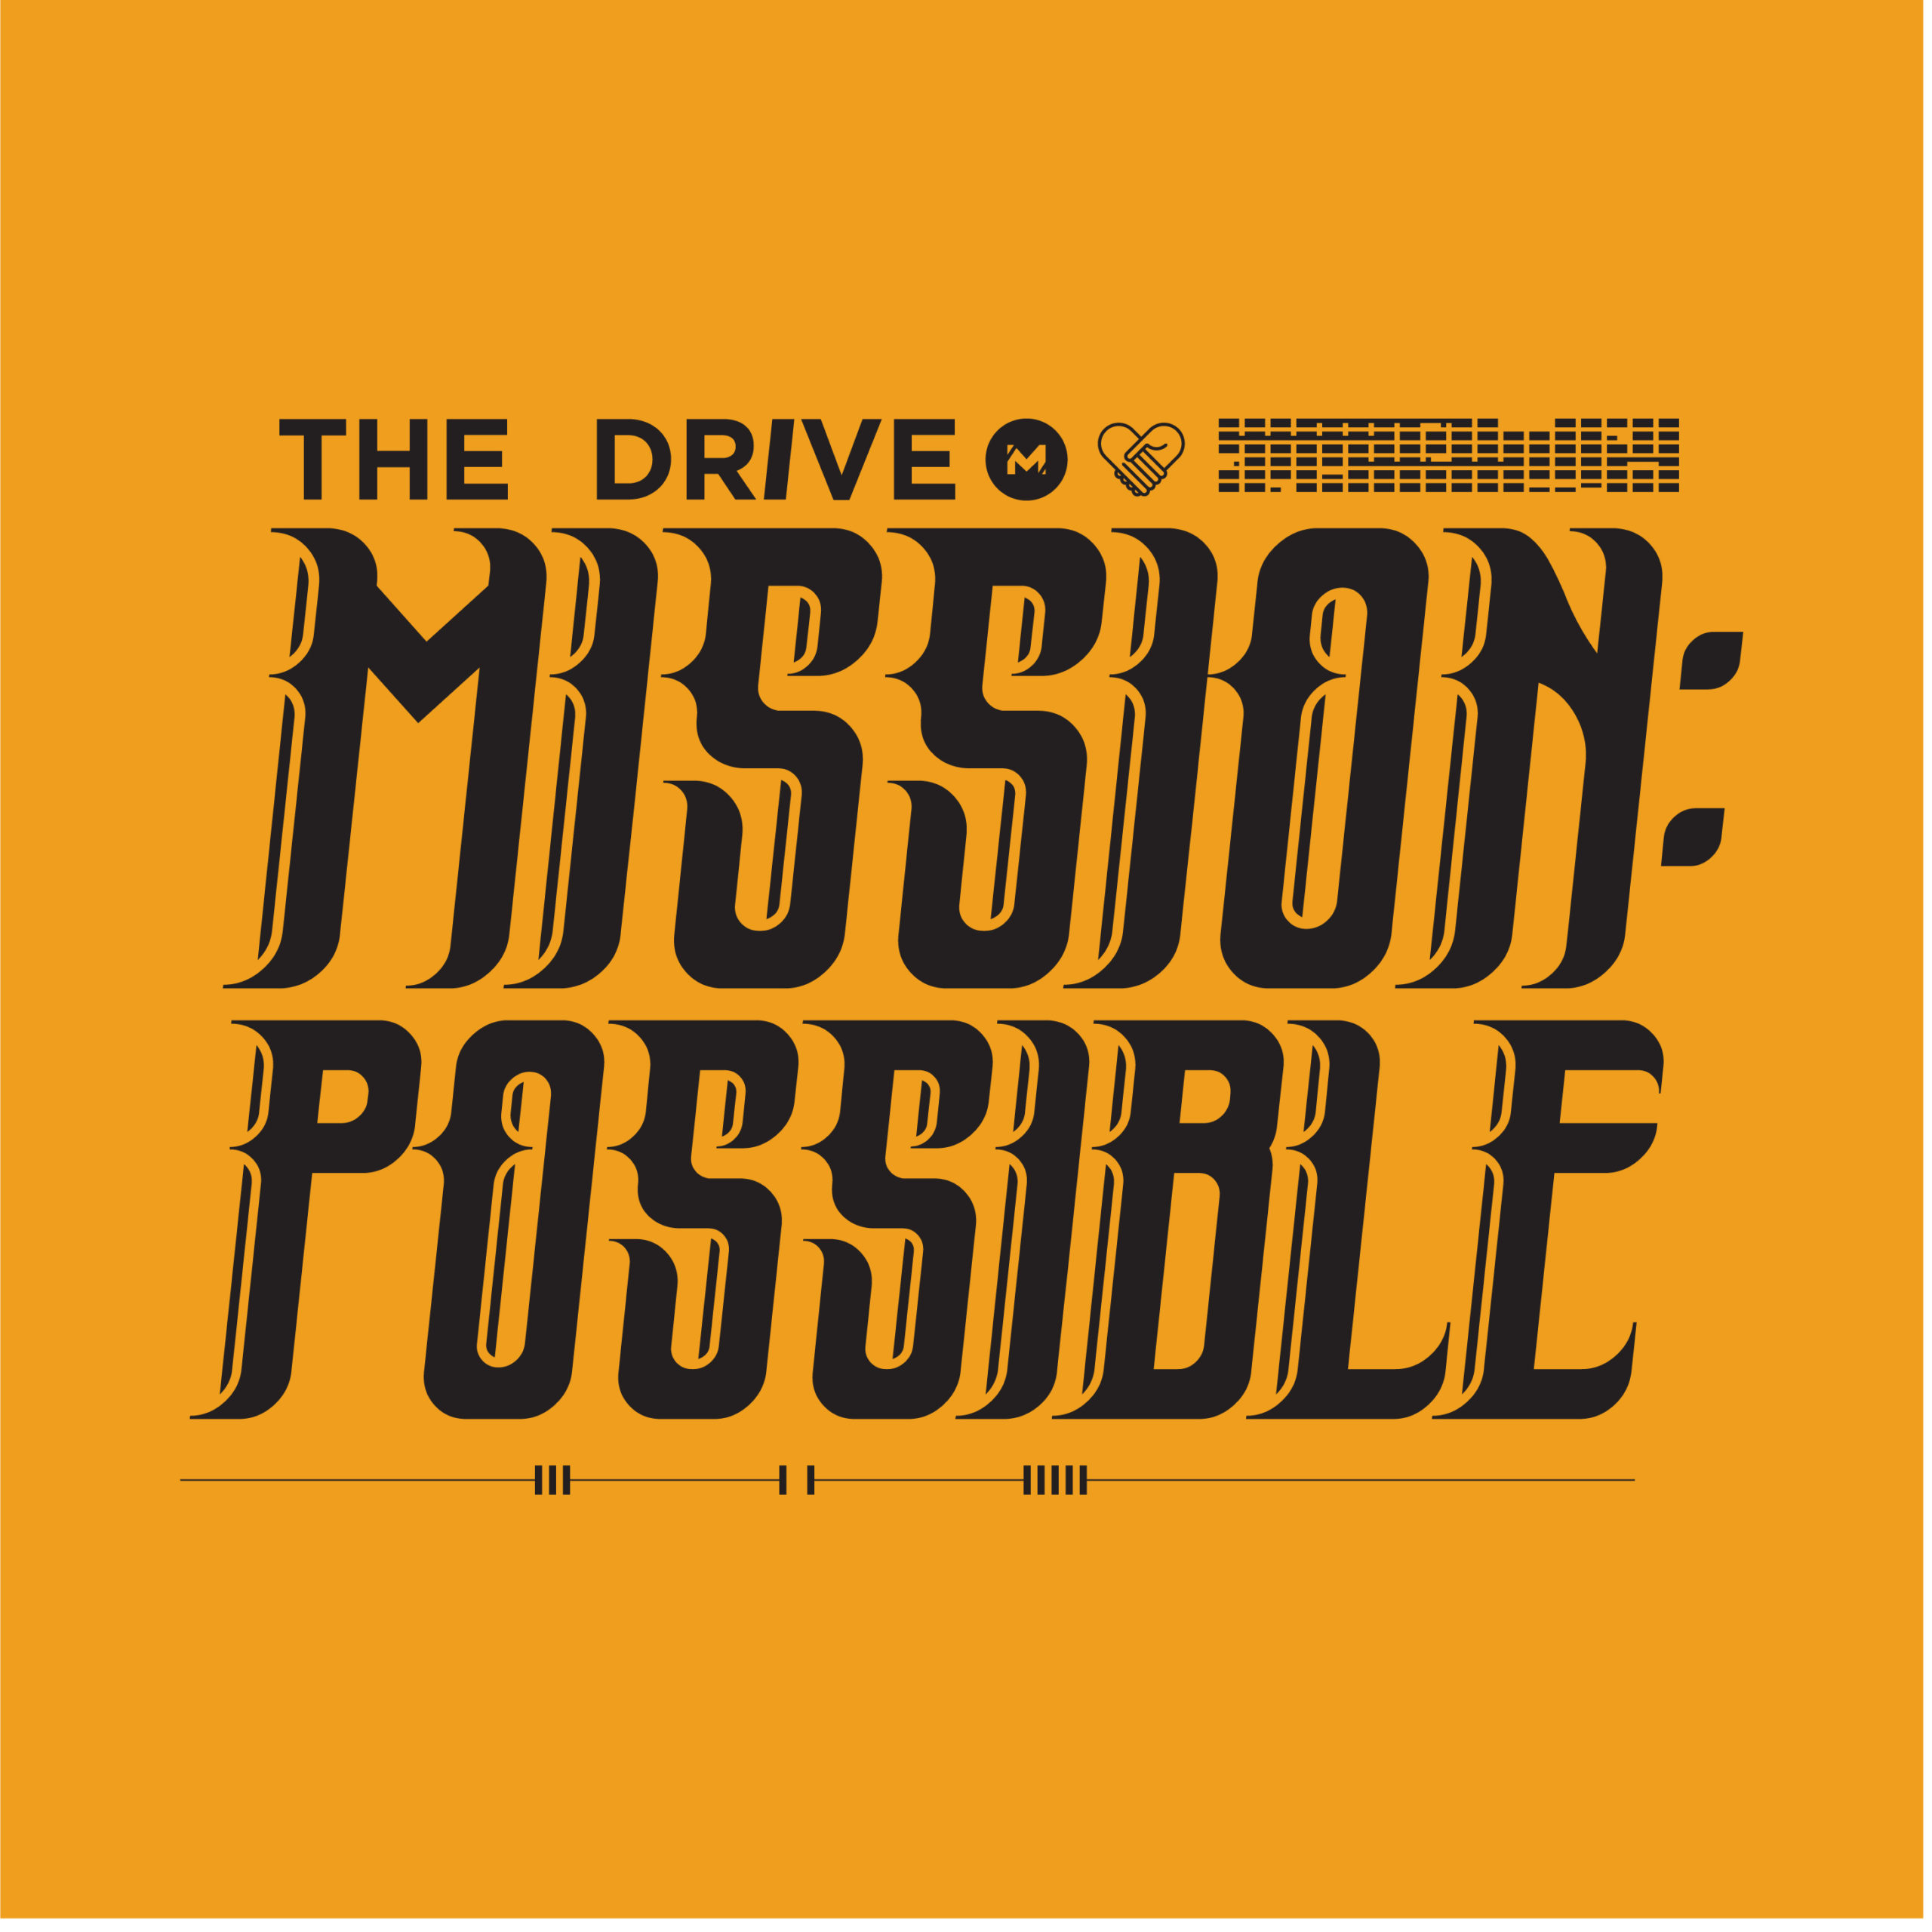 The Drive: Mission Possible